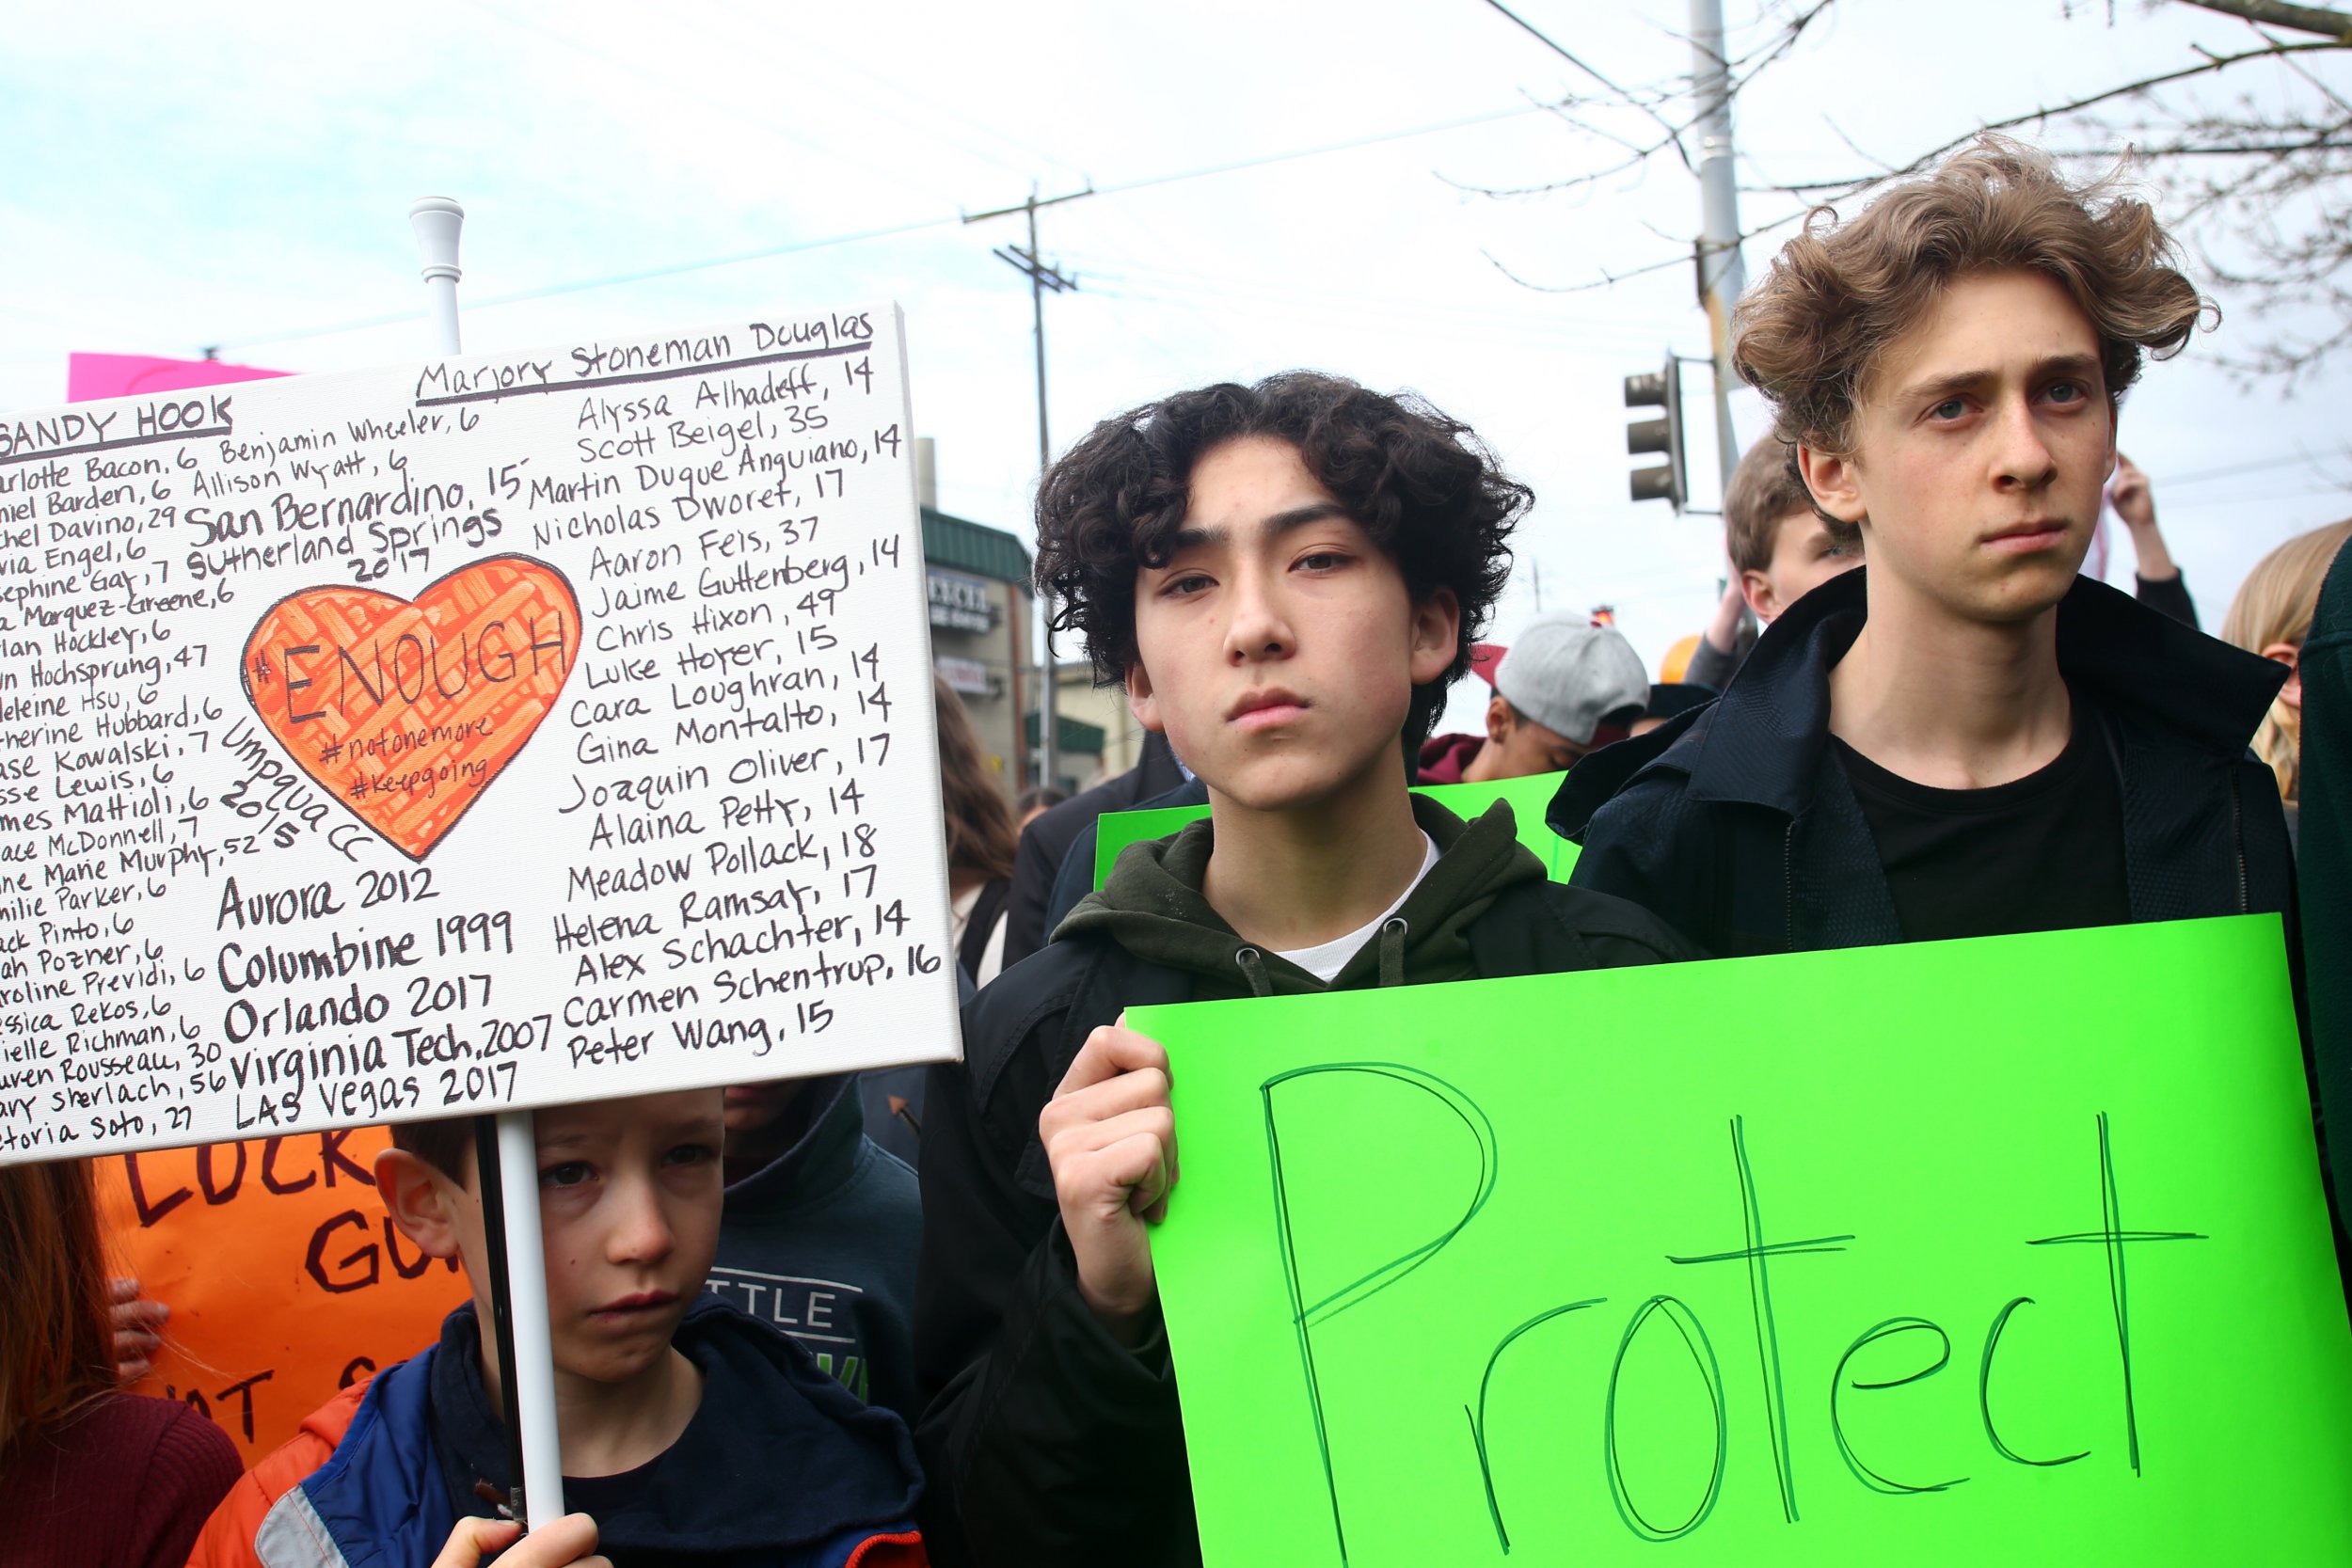 Everything You Should Know About National Walkout Day on April 20